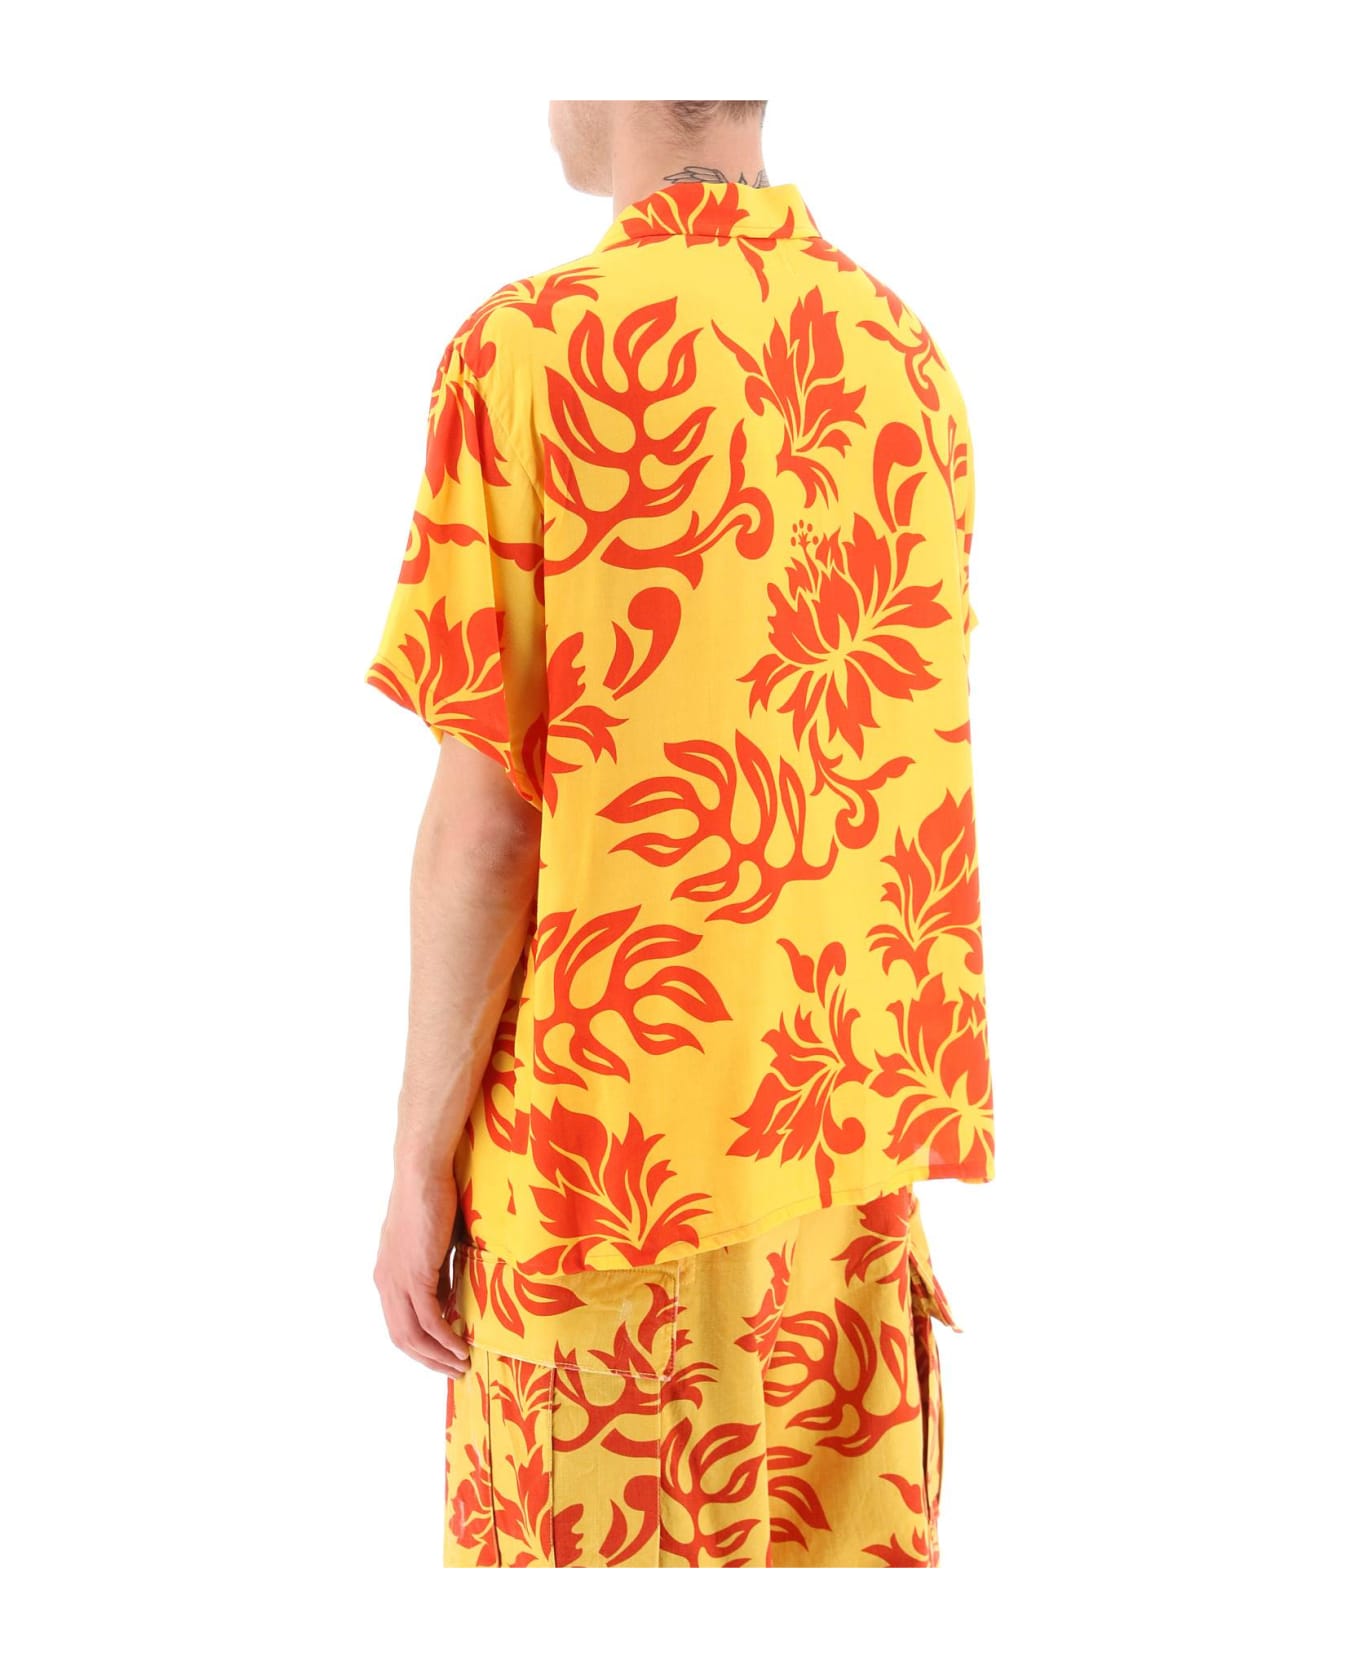 ERL Printed Viscose Bowling Shirt - ERL TROPICAL FLOWERS 1 (Yellow) シャツ